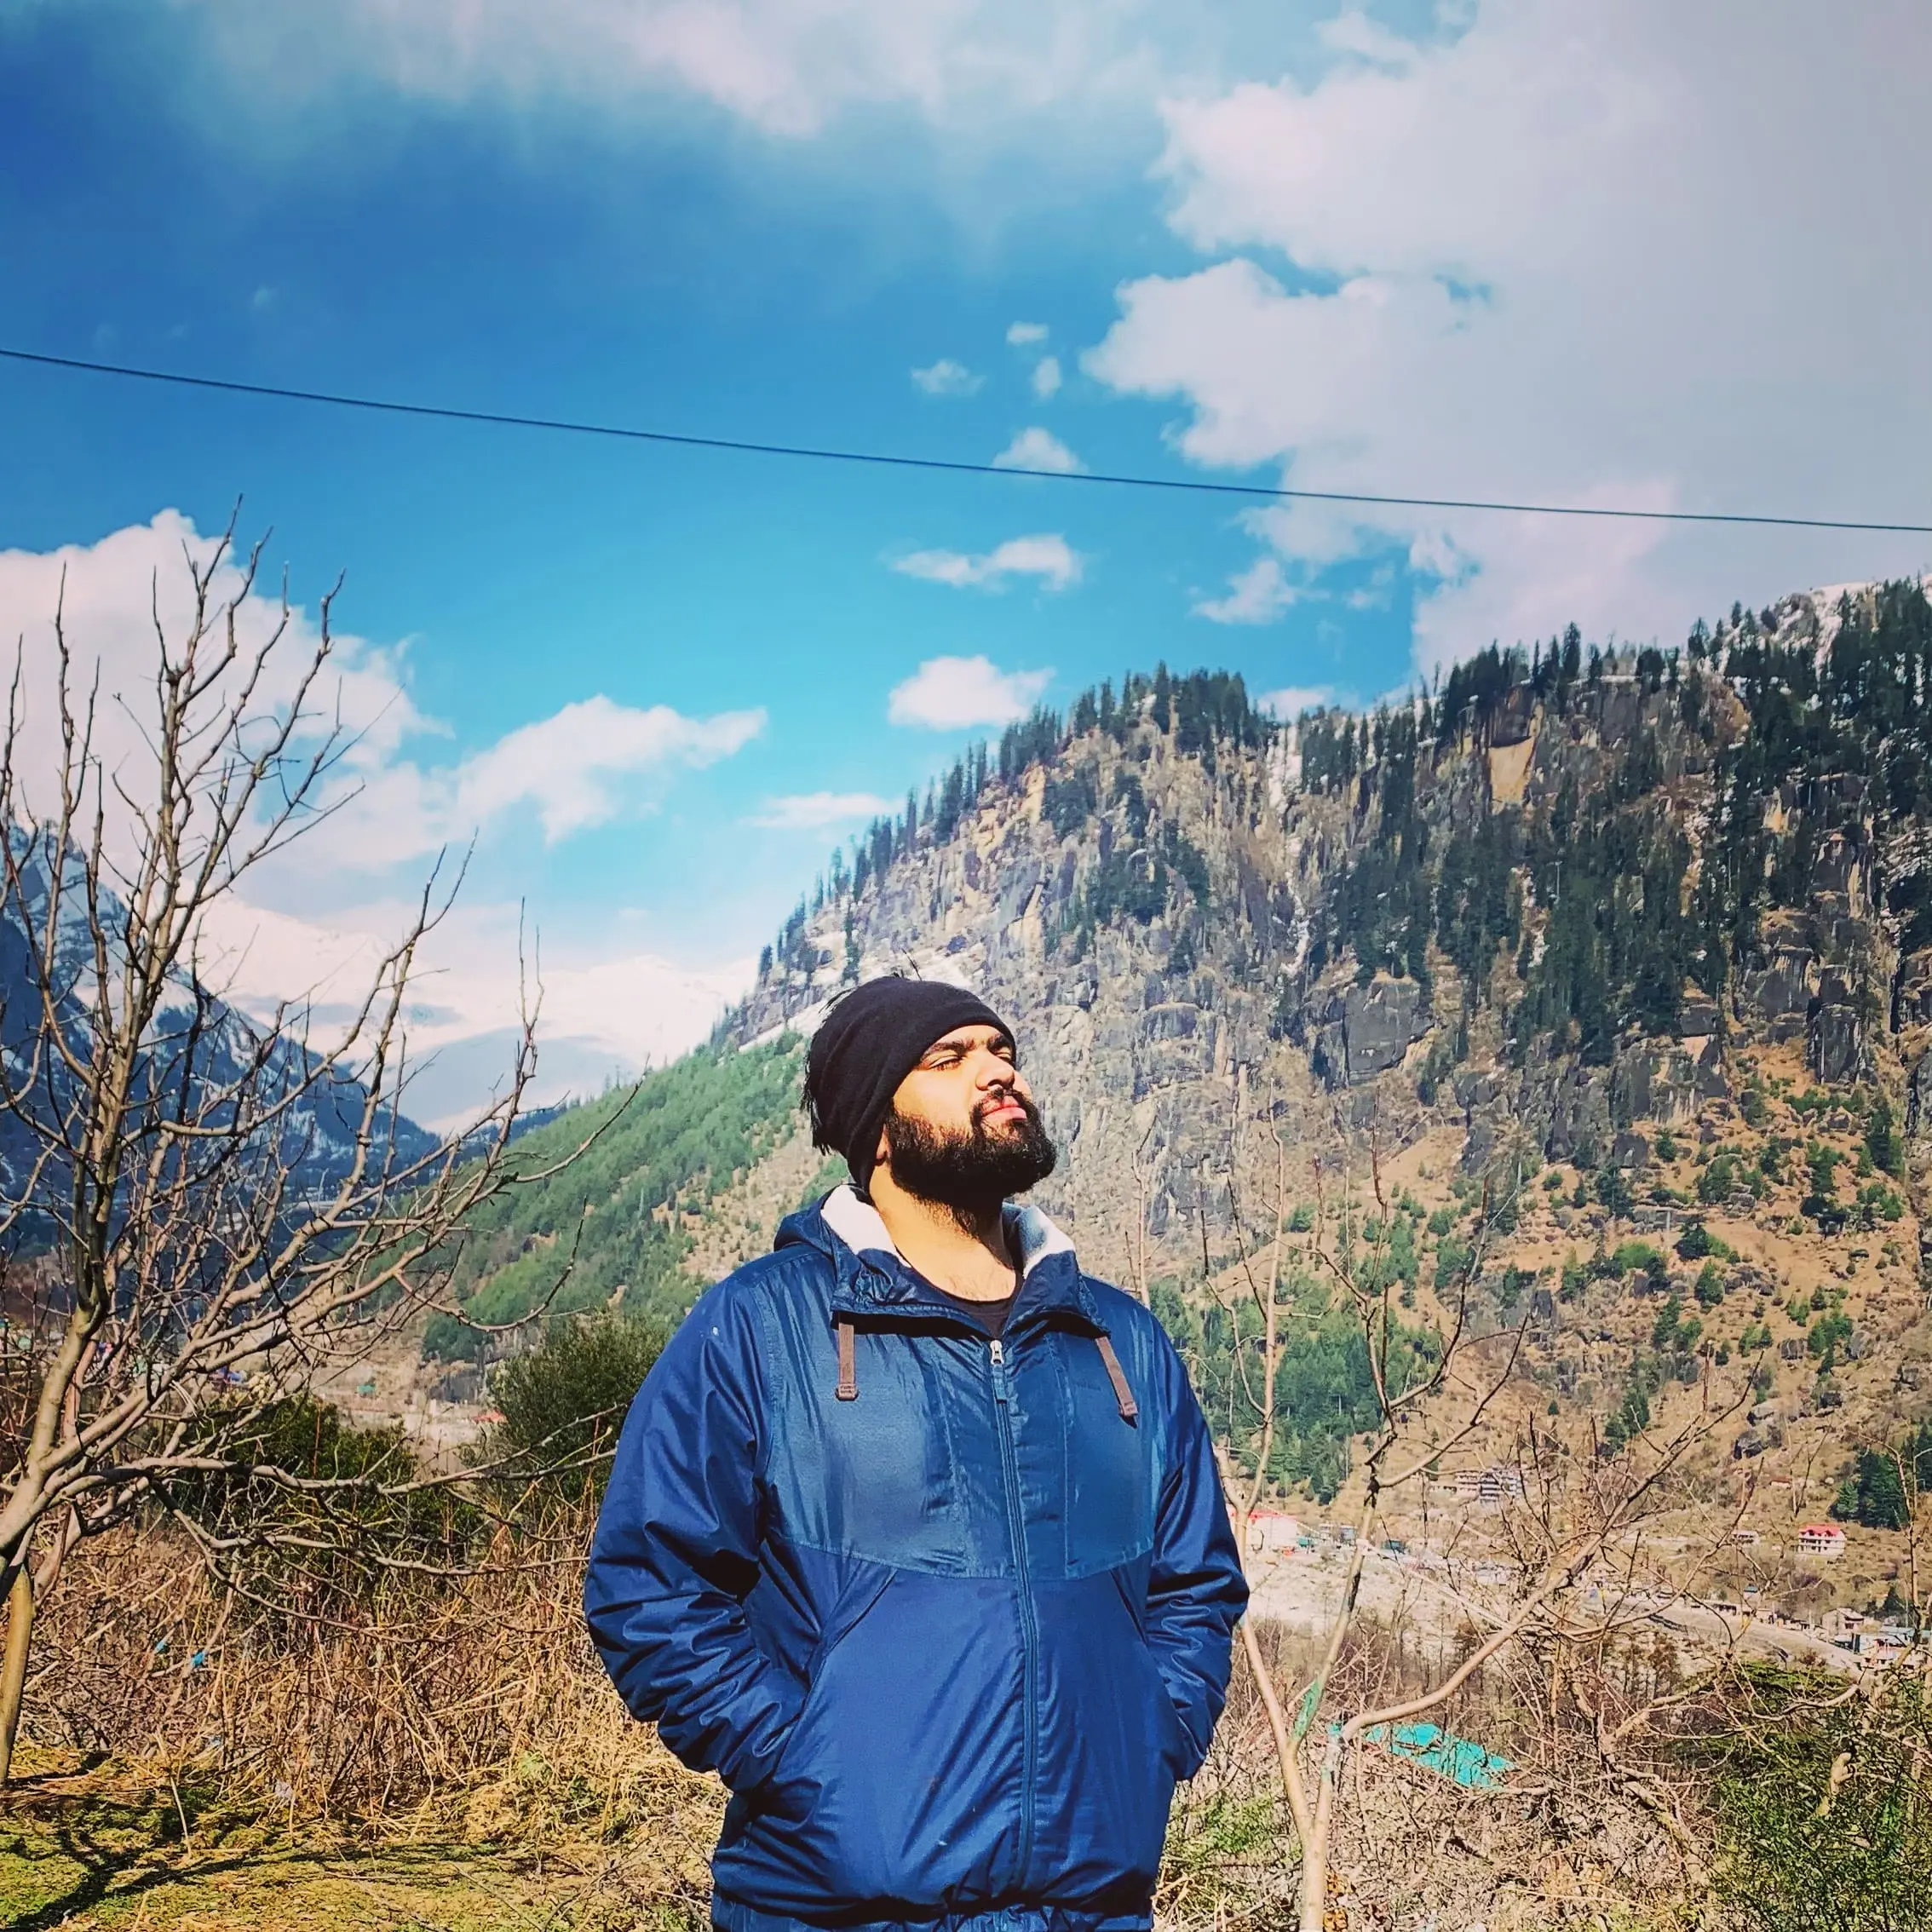 Is Manali cheap or expensive?